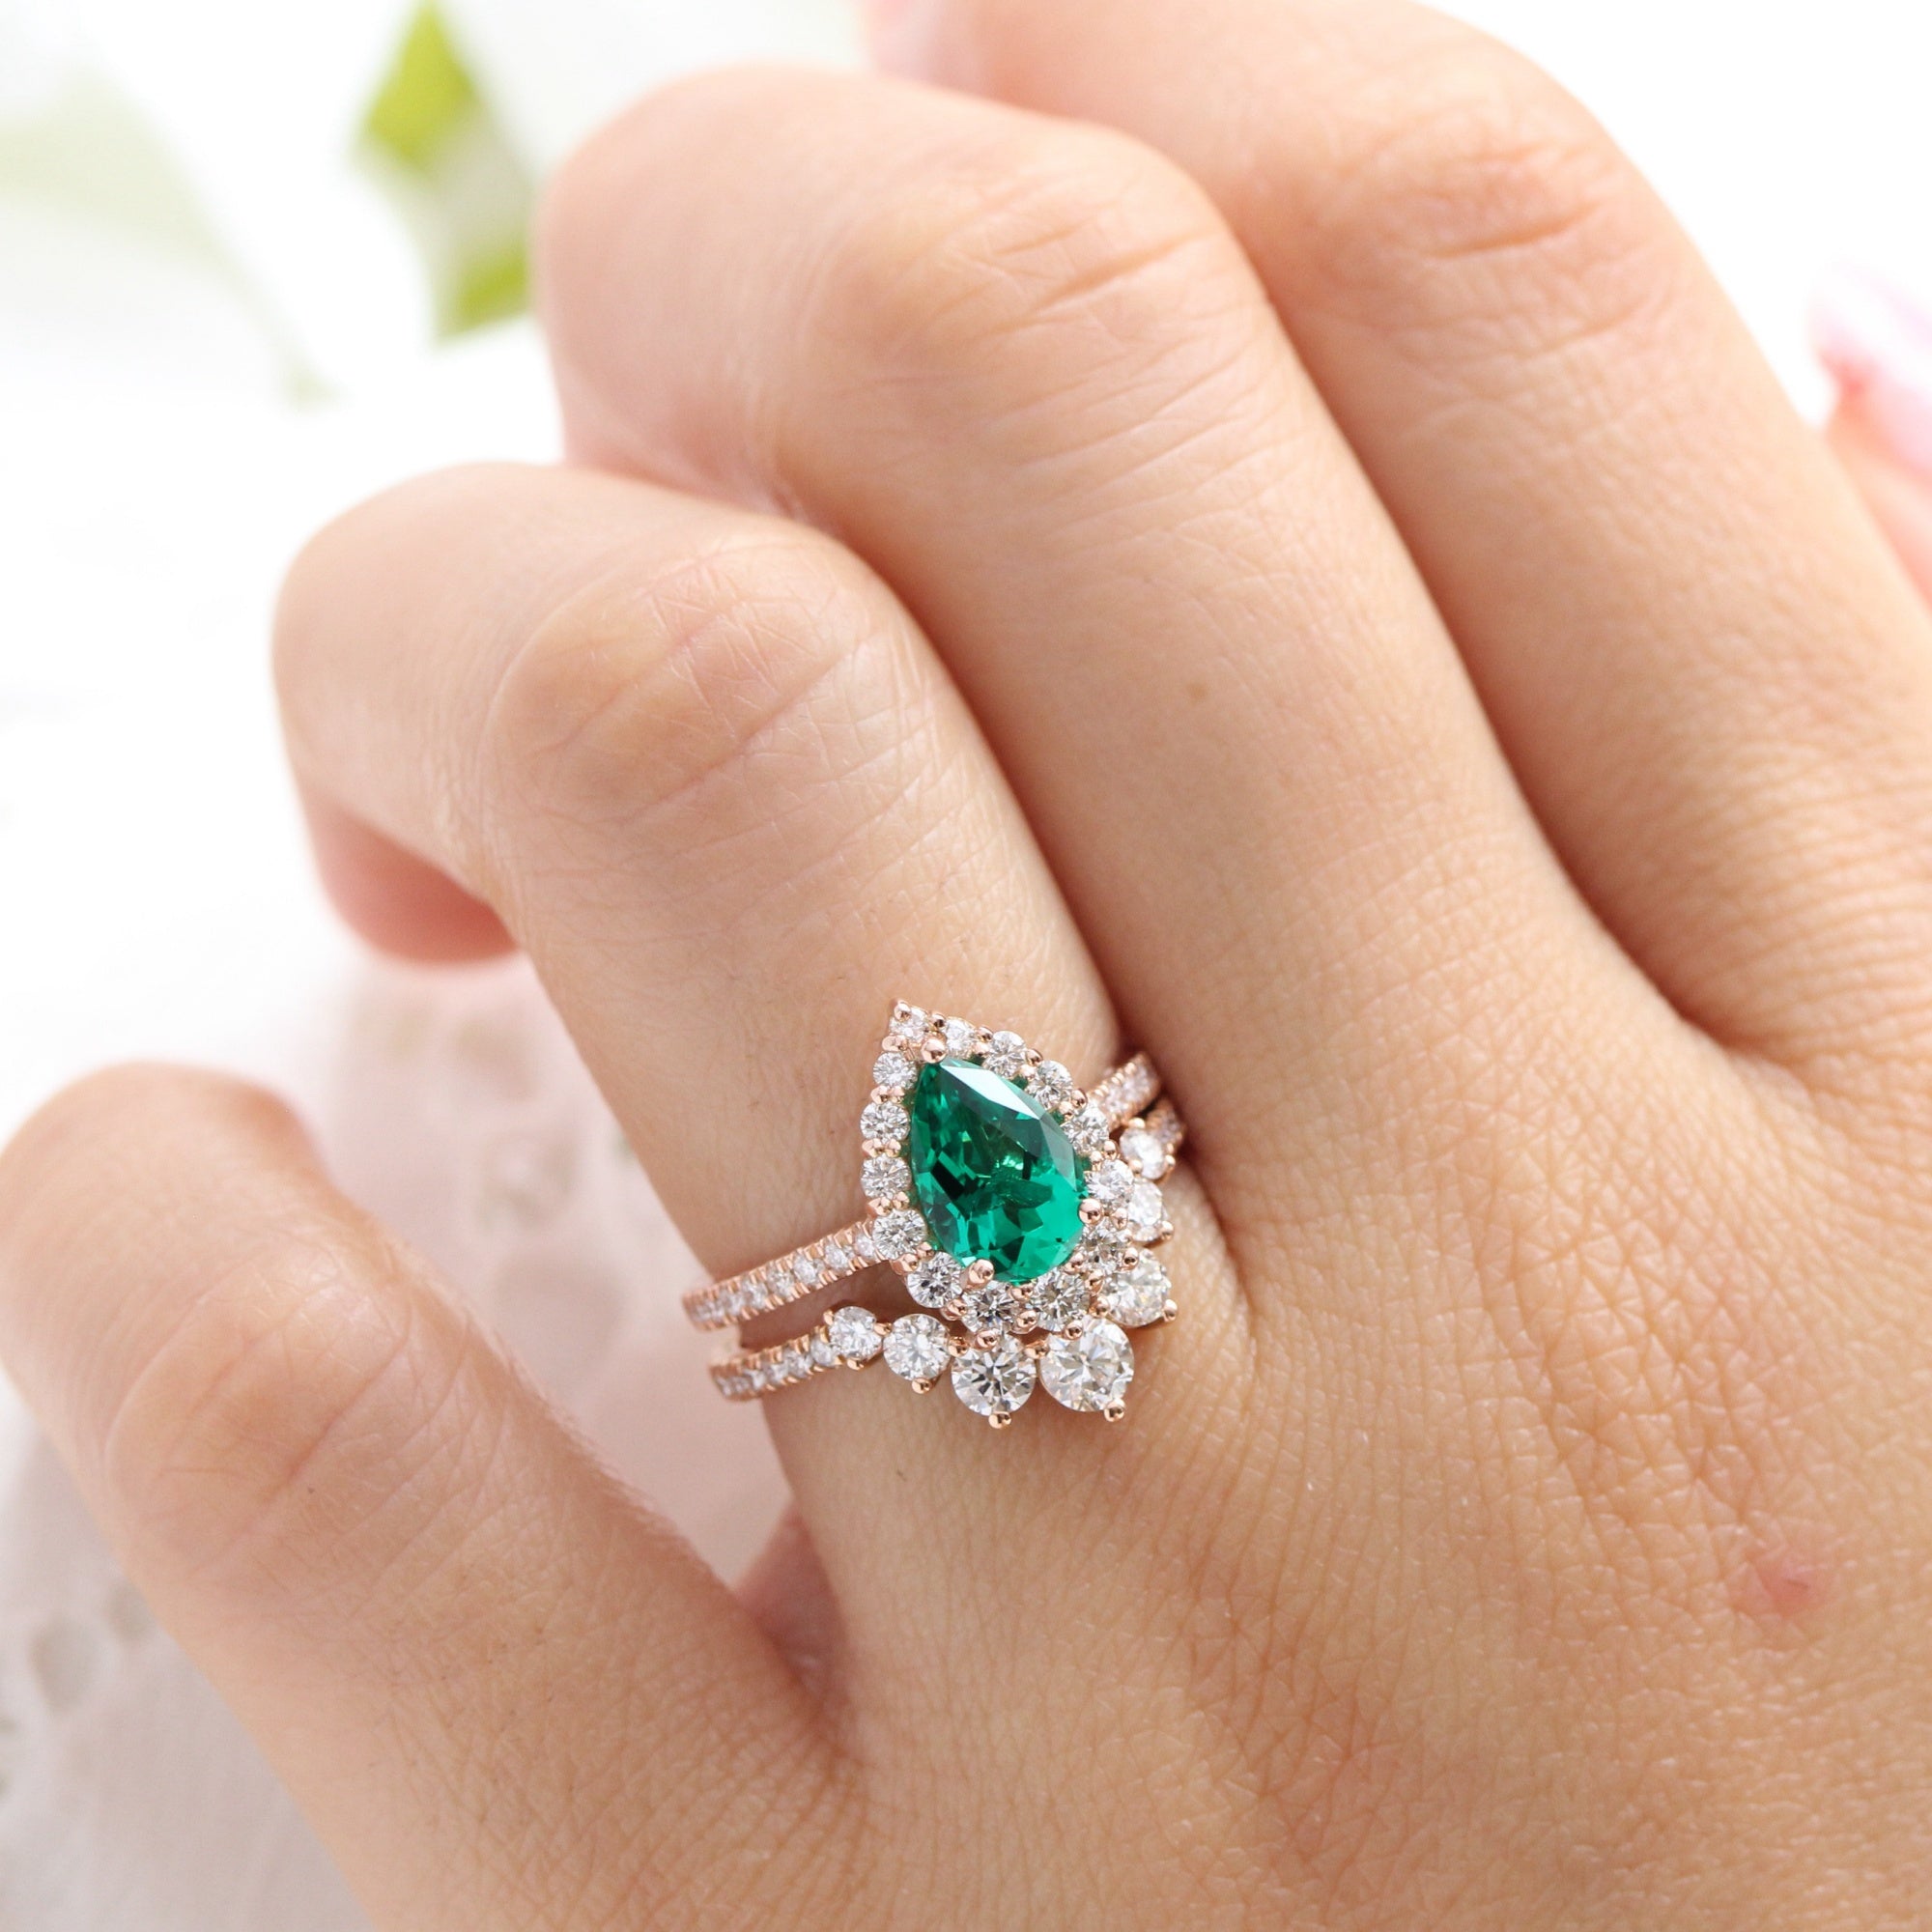 Halo diamond pear emerald ring stock rose gold deep curved wedding band la more design jewelry